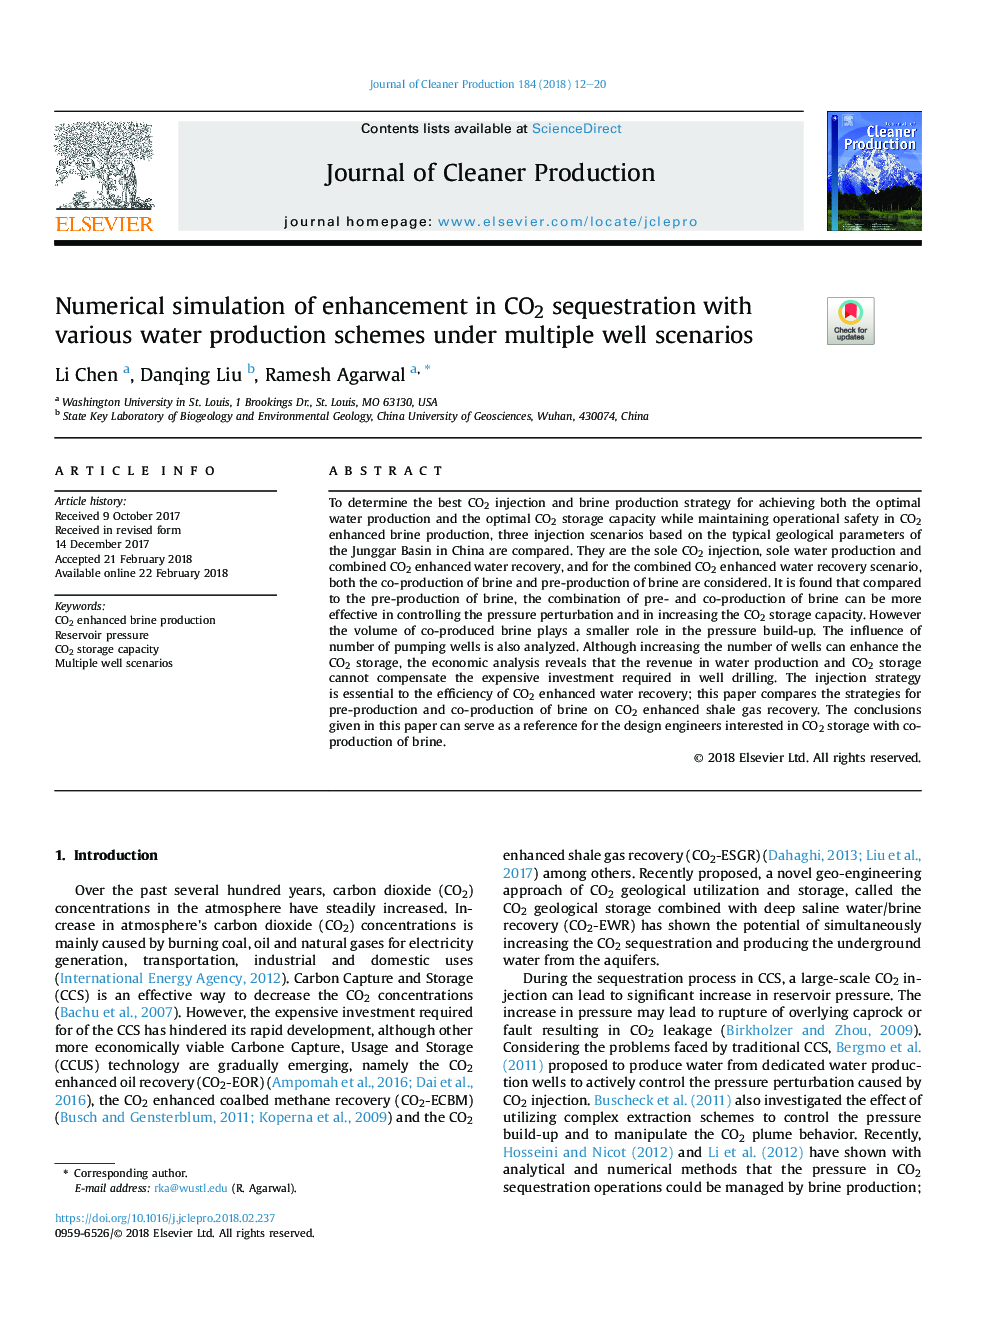 Numerical simulation of enhancement in CO2 sequestration with various water production schemes under multiple well scenarios